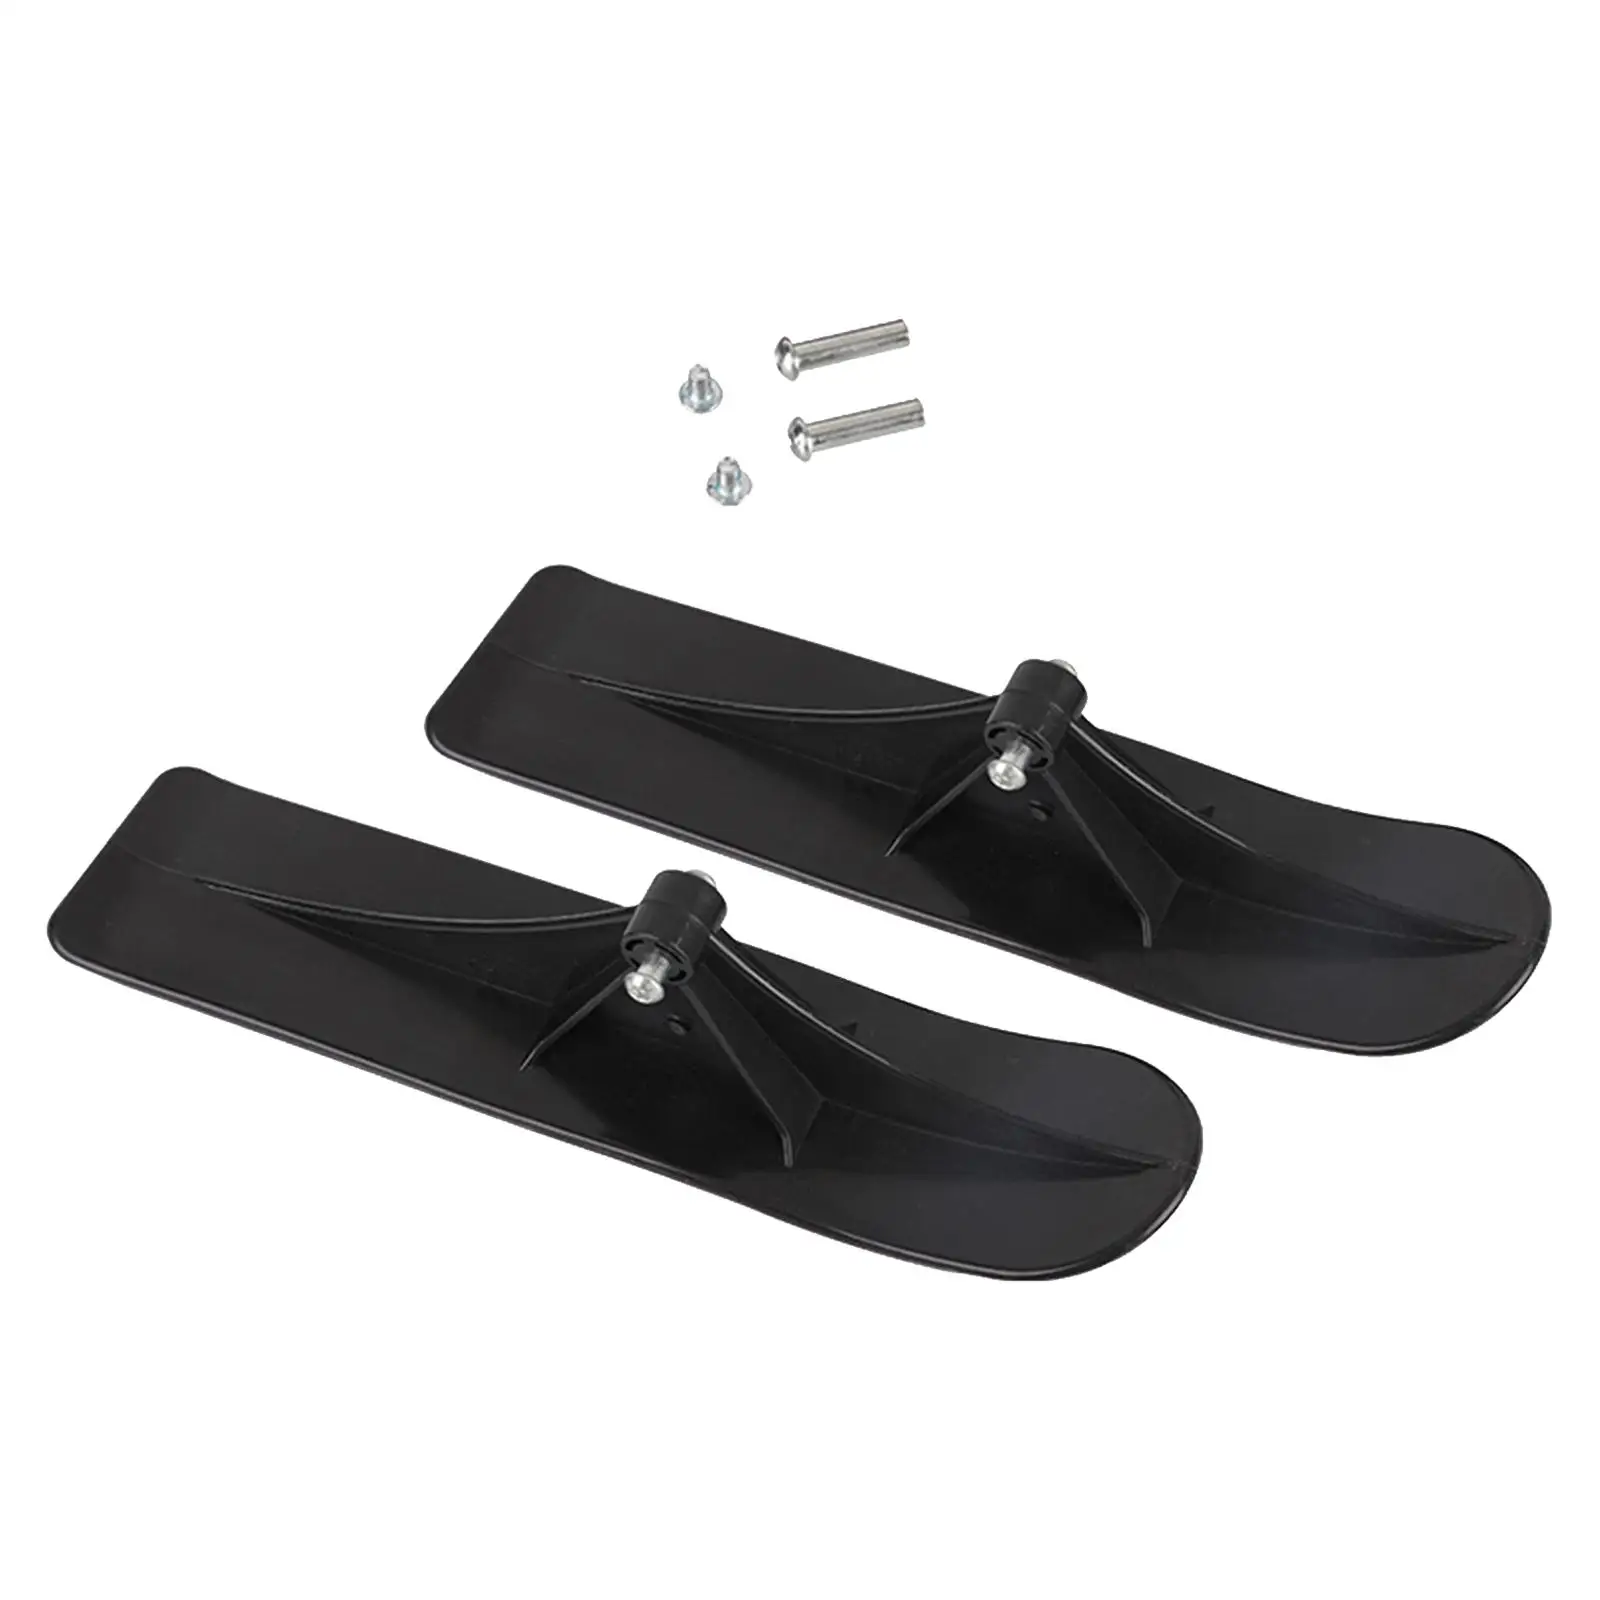 Snow Scooter Ski Sled Flat Bottom Snowmobile Attachment Durable for Novices